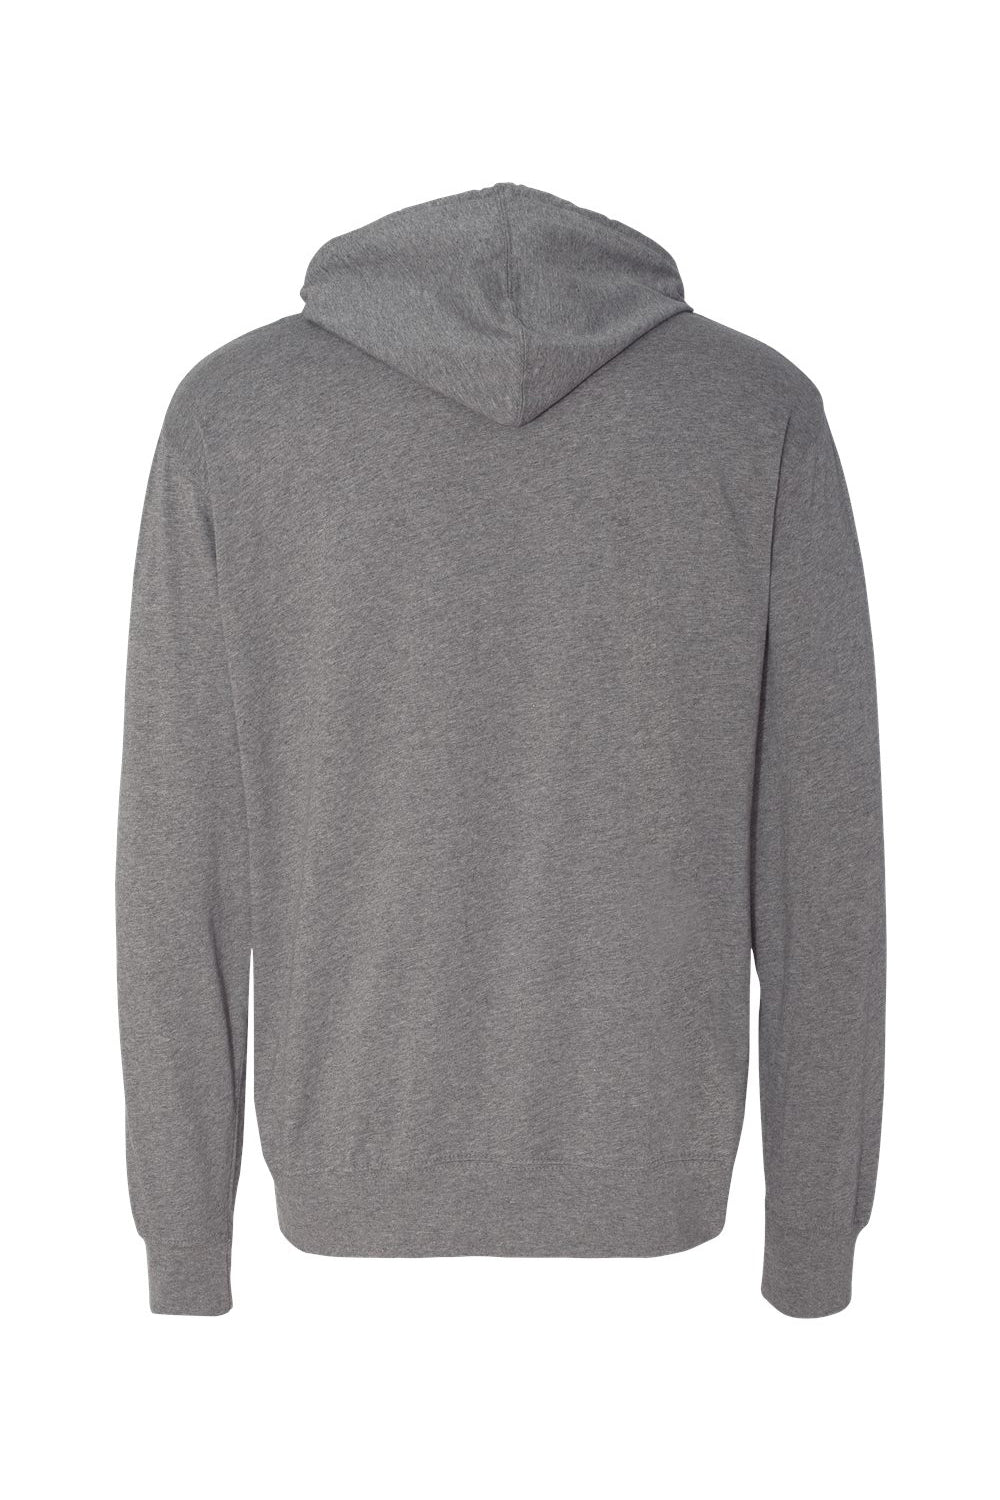 Independent Trading Co. SS150J Mens Long Sleeve Hooded T-Shirt Hoodie Heather Gunmetal Grey Flat Back